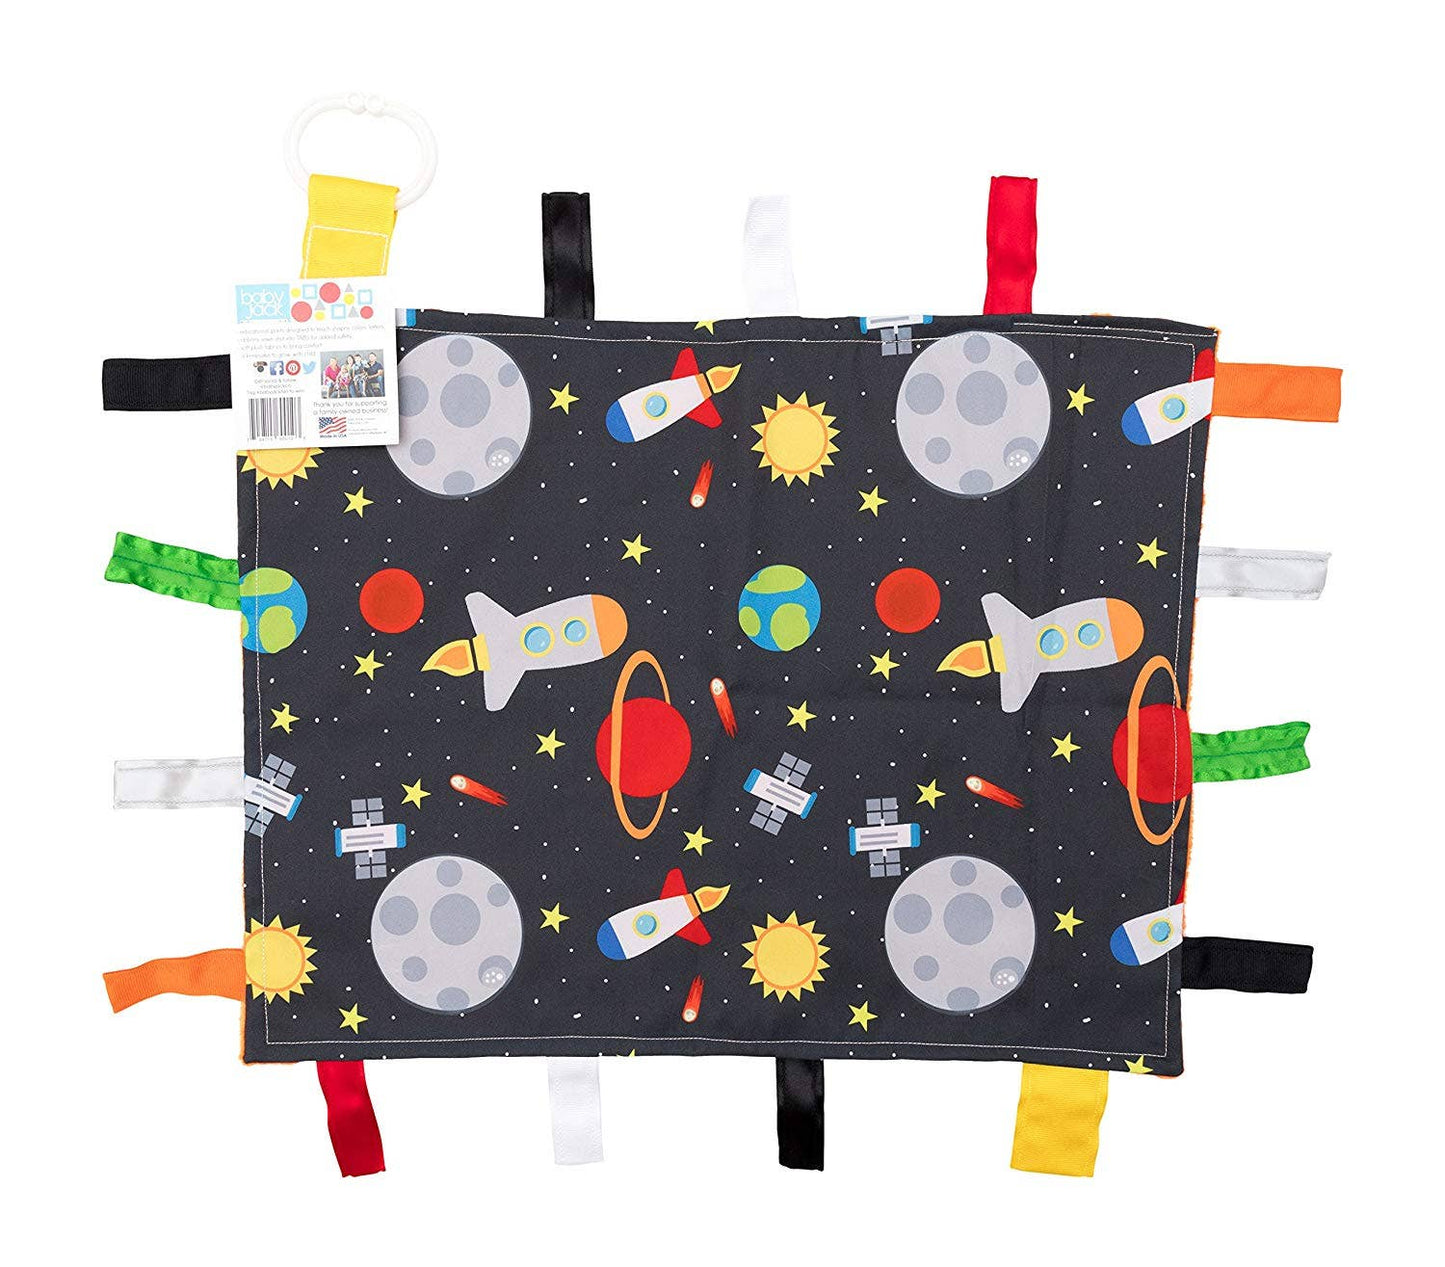 Baby Jack and Company - Space Stars Rockets Taggy Blanket Learning Lovey 14" x 18